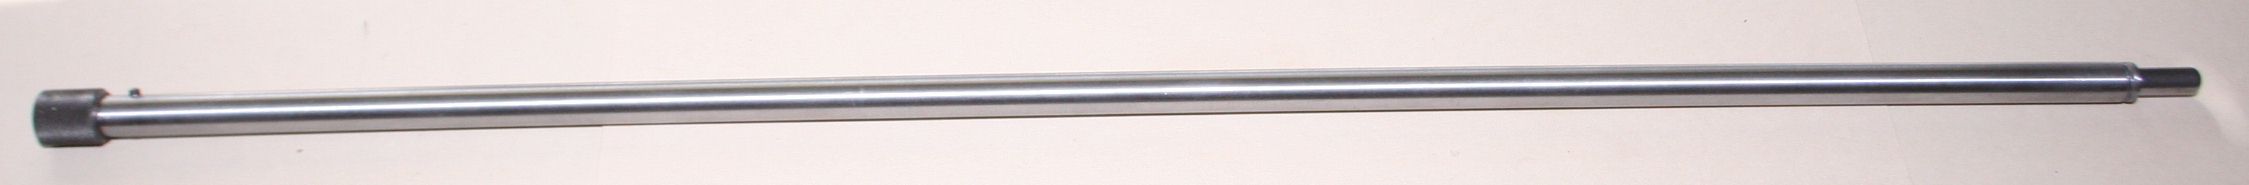 Magazine tube INNER Winchester model 61 Long rifle - Click Image to Close